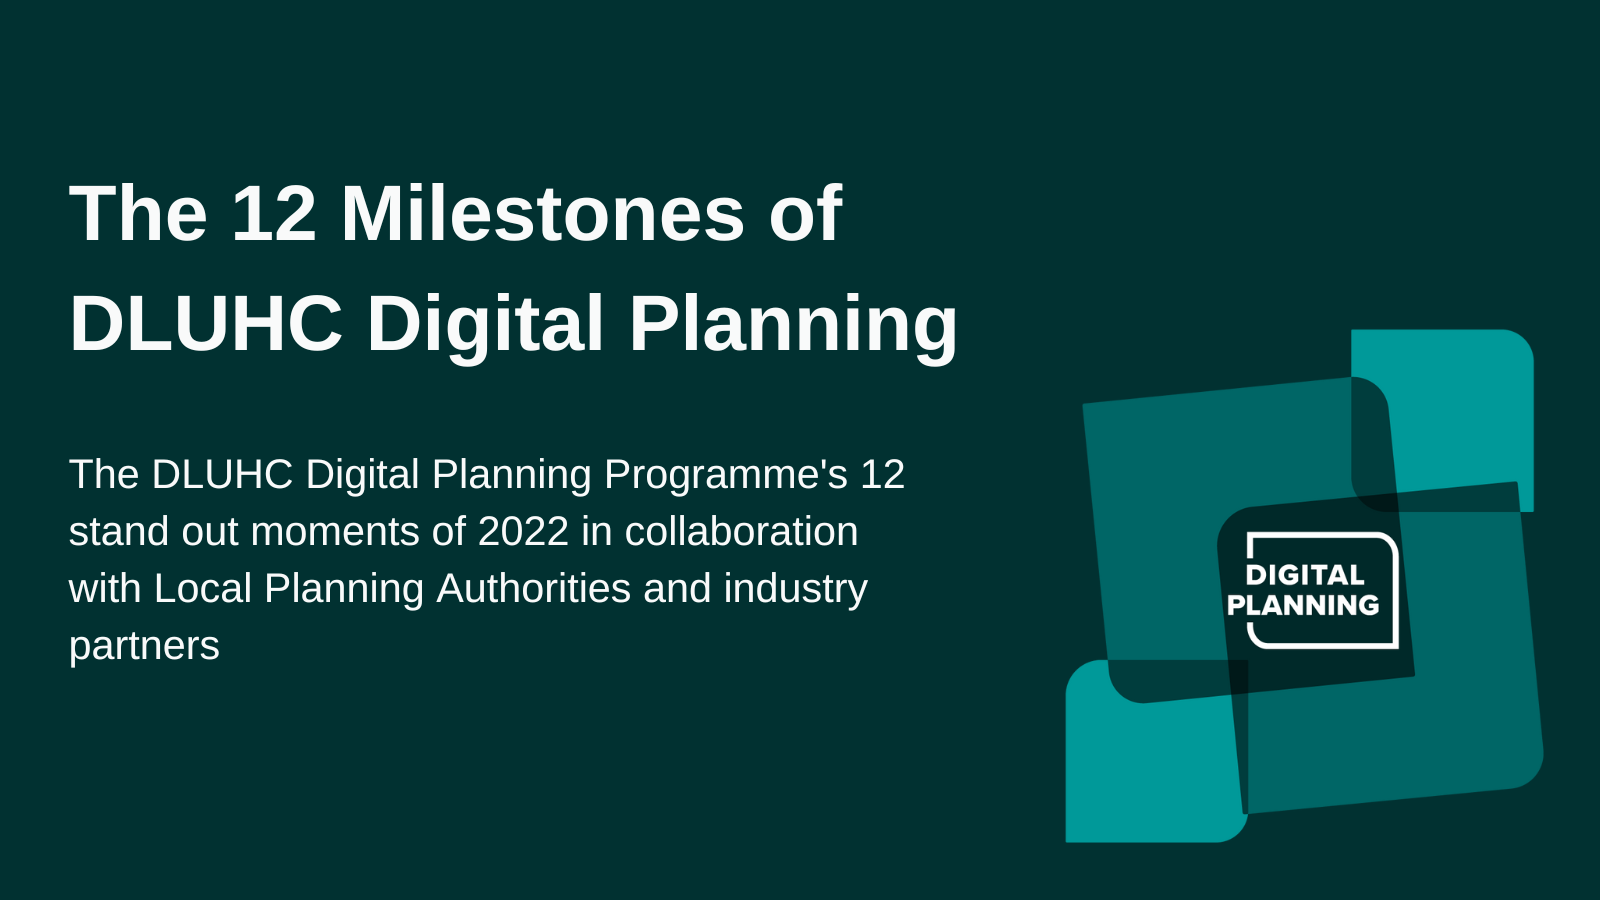 The 12 Milestones of DLUHC Digital Planning 2022. The DLUHC Digital Planning Programme's 12 stand out moments of 2022 in collaboration with Local Planning Authorities and industry partners.